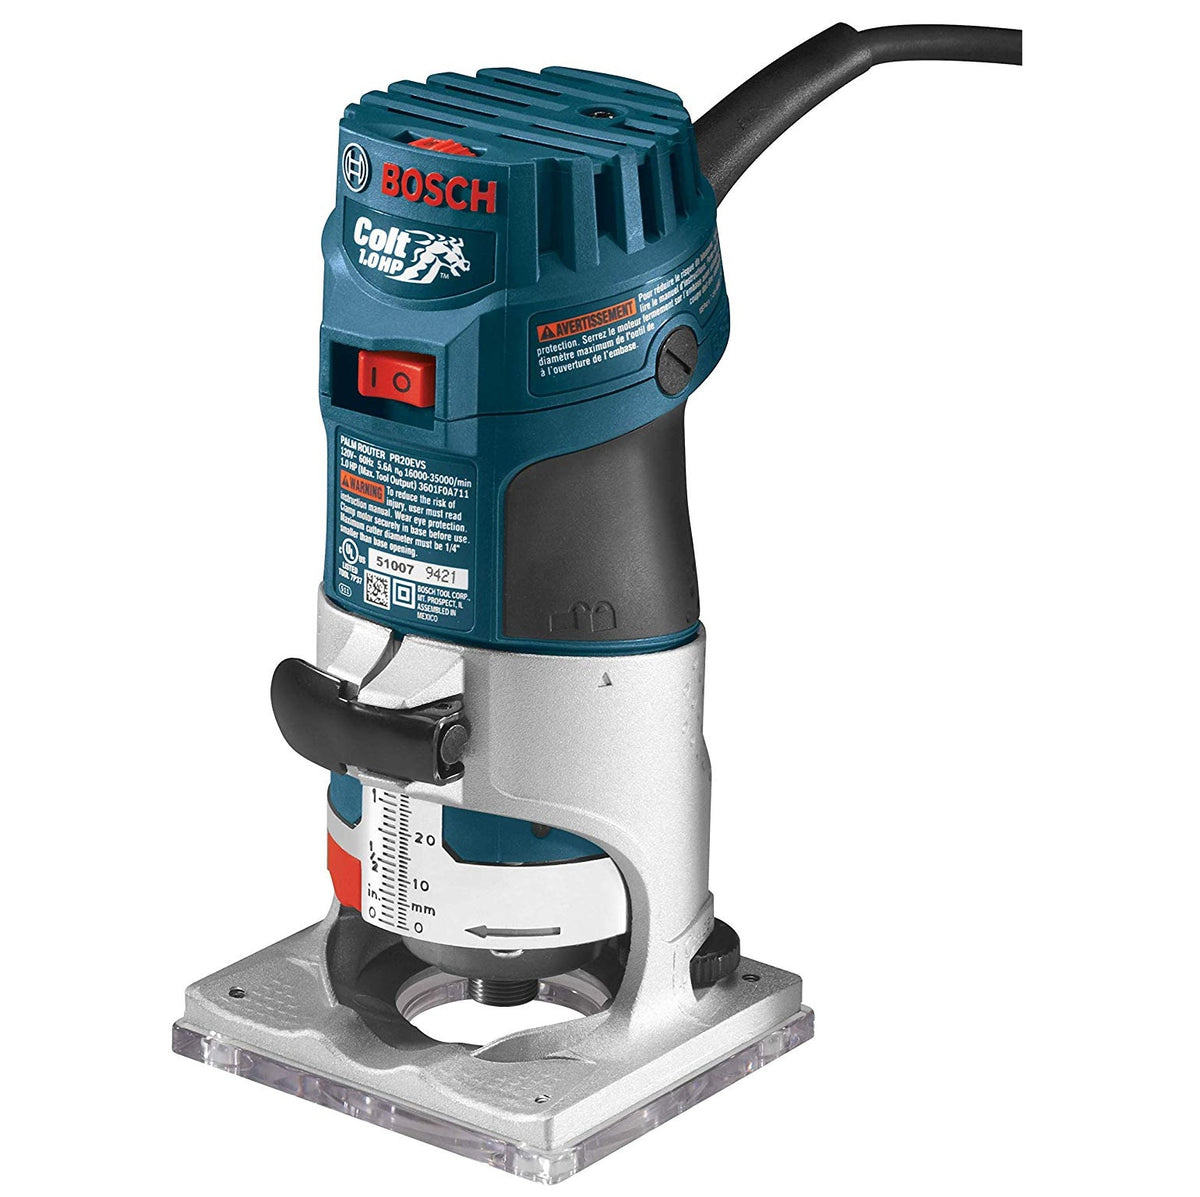 Bosch PR20EVS Electronic Variable-Speed Palm Router